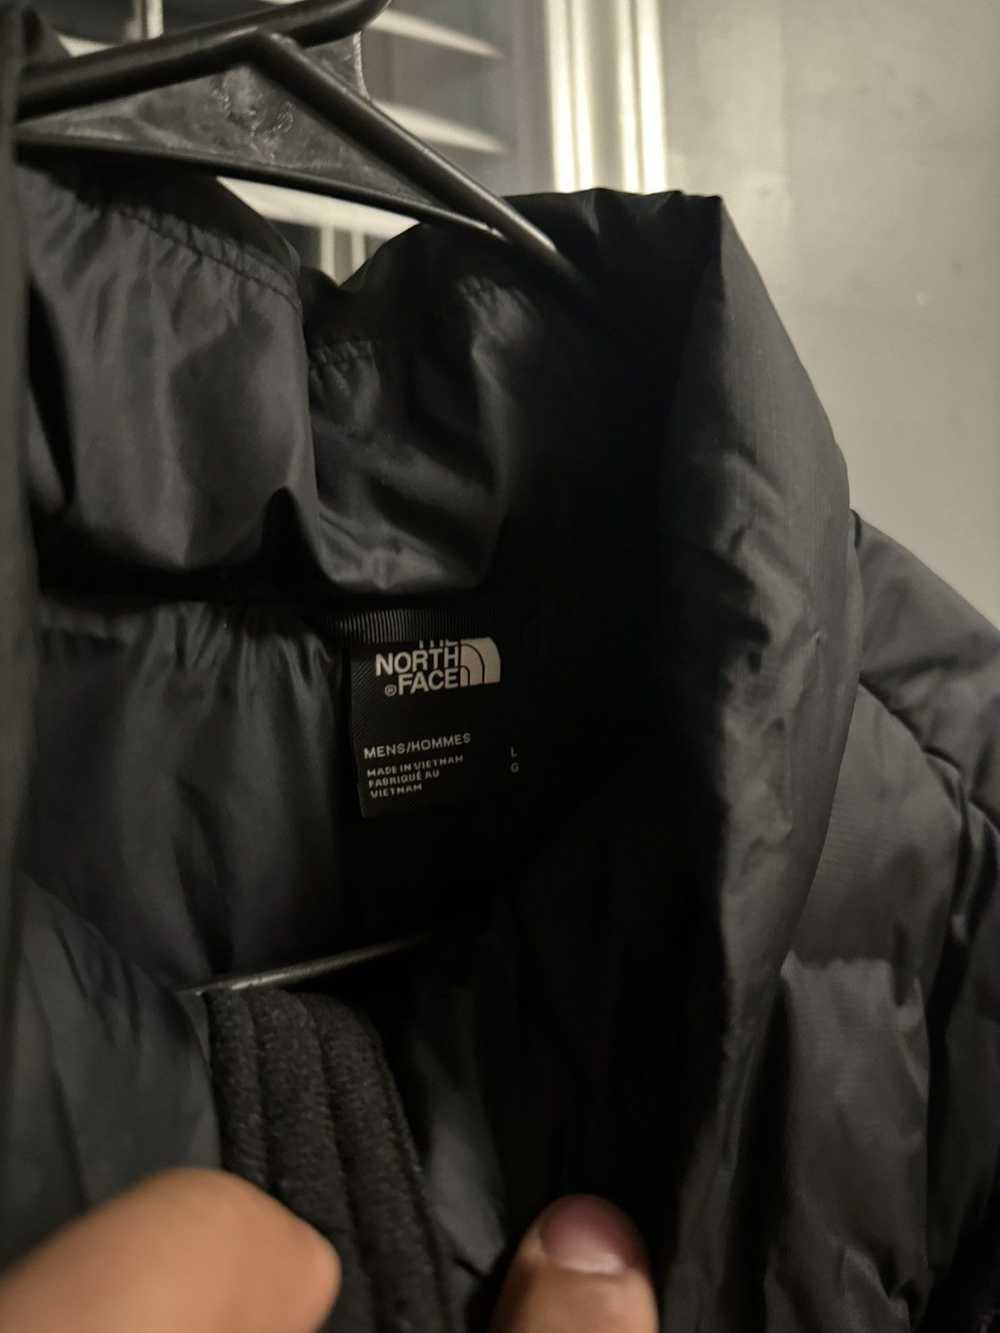 The North Face North Face Puffer/Shell - image 3